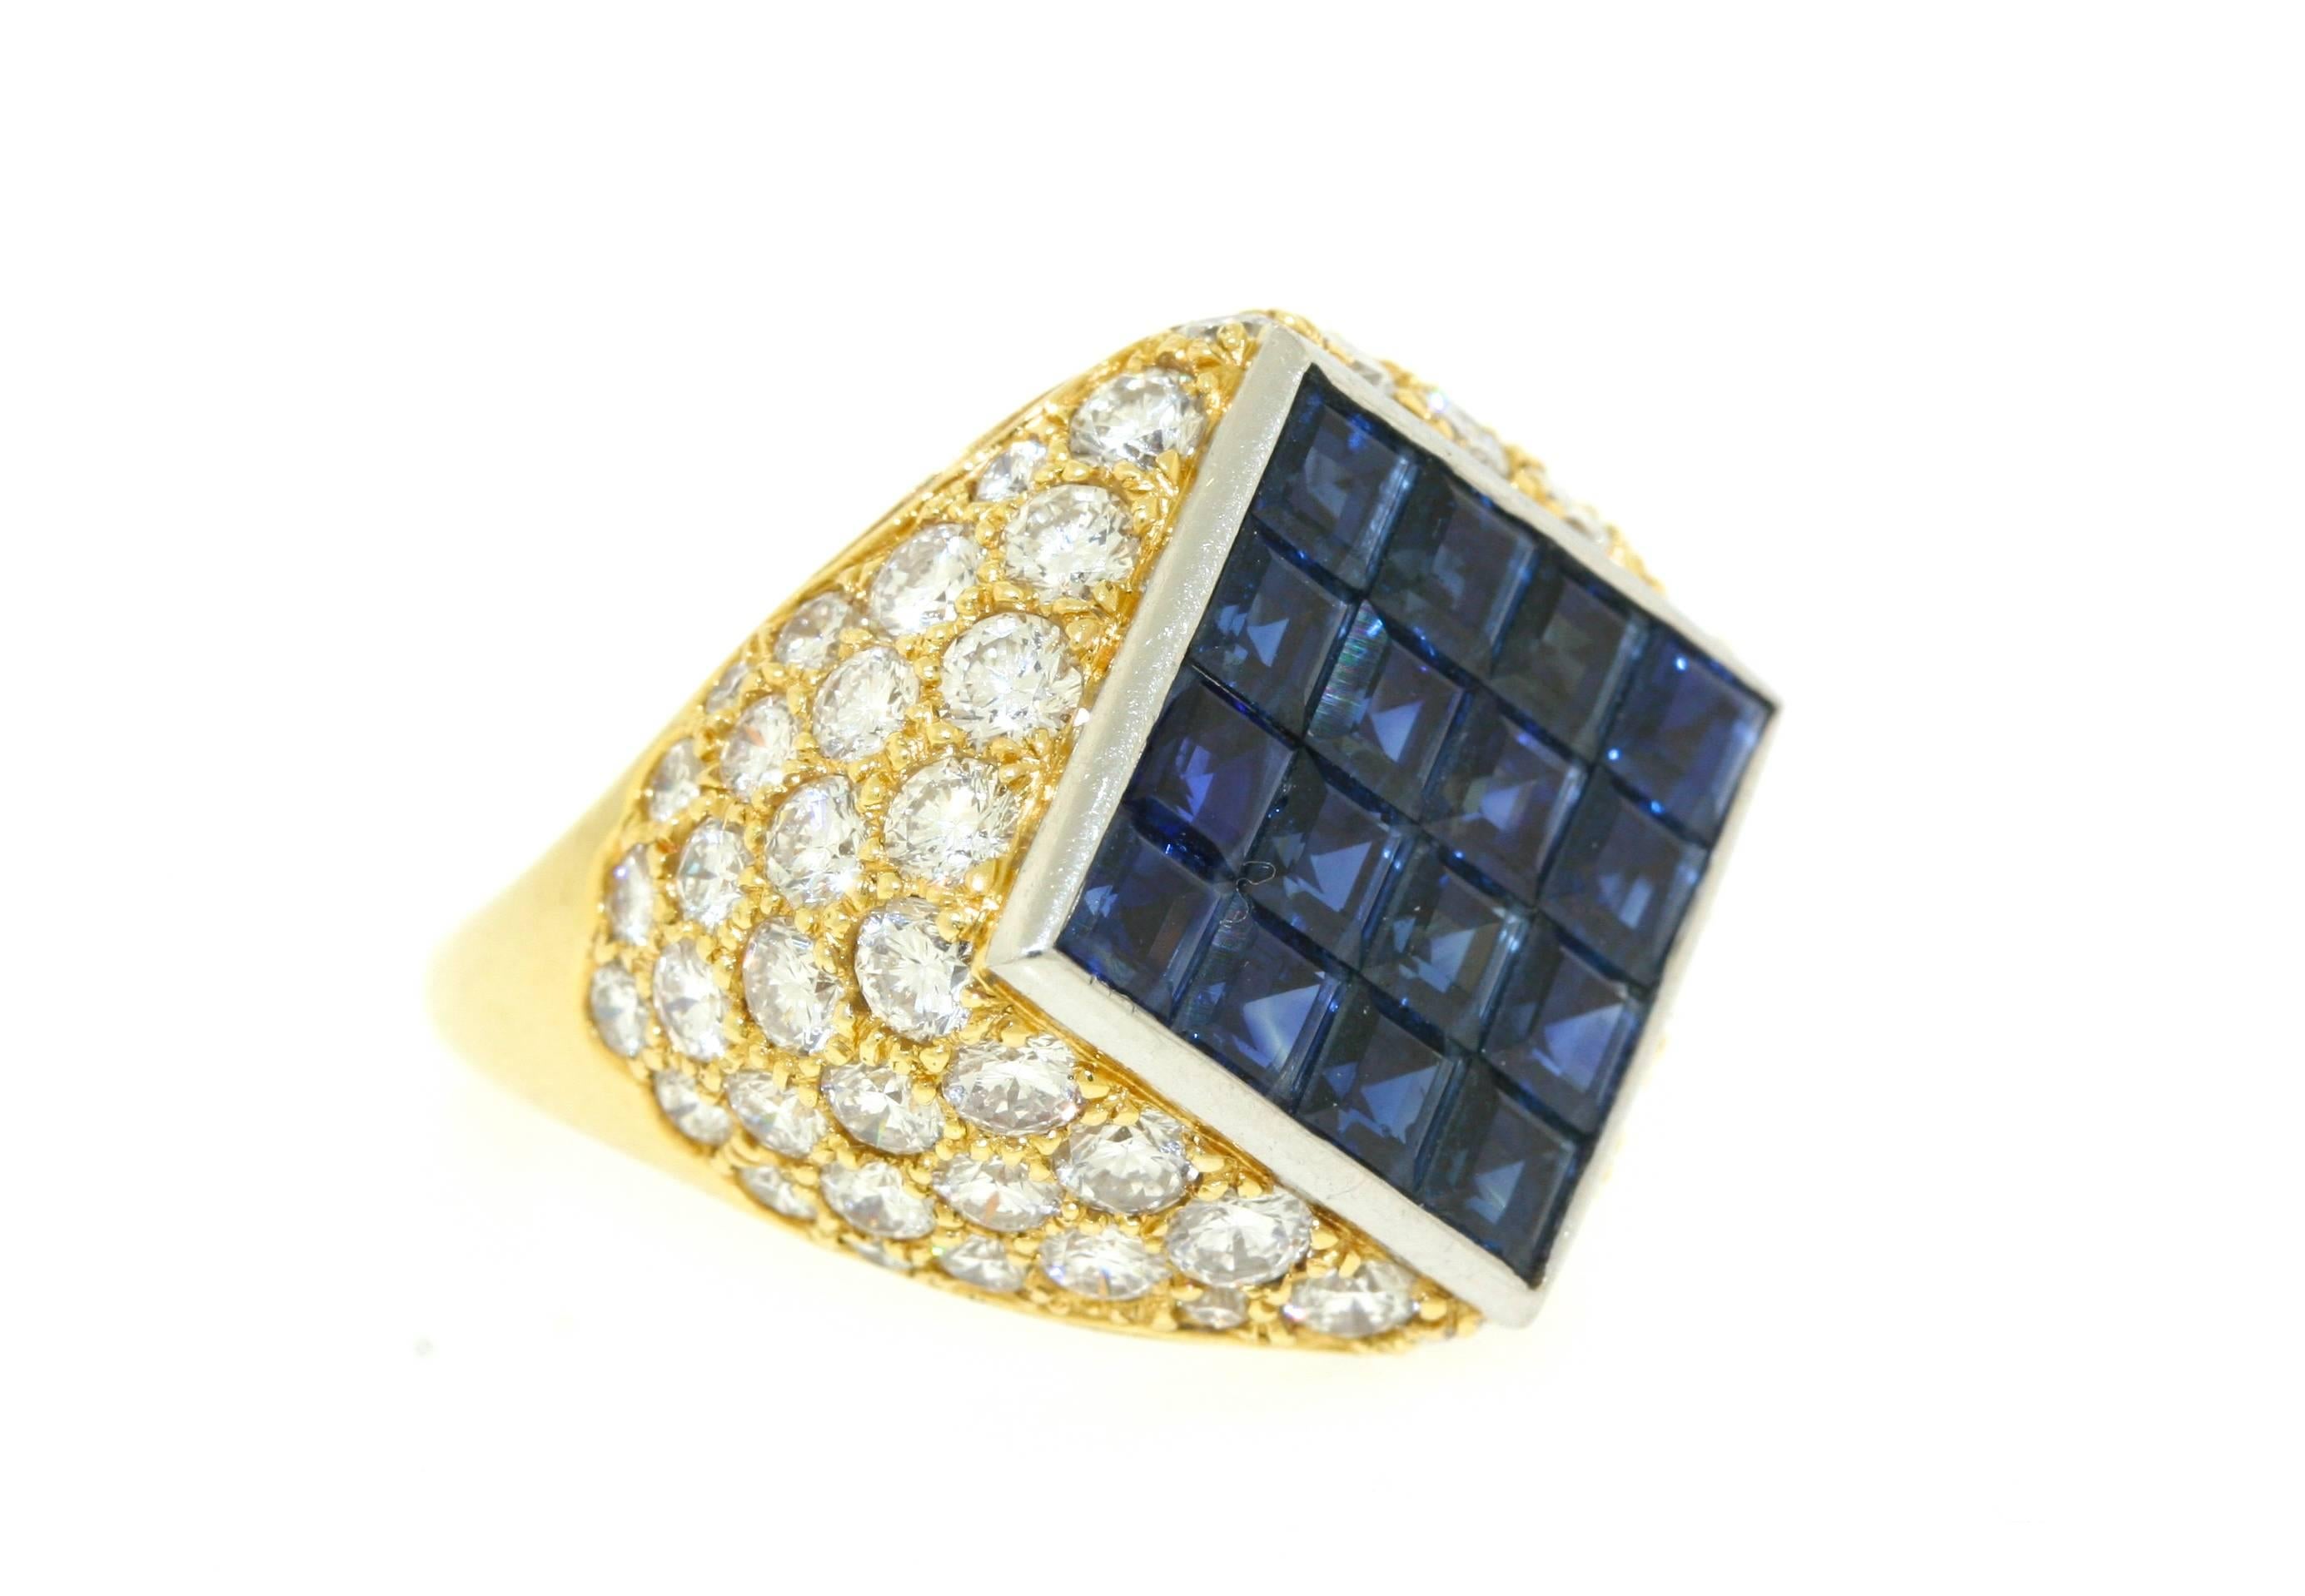 Van Cleef & Arpels Mystery Set Sapphire Diamond Gold Bombe Ring In Excellent Condition For Sale In New York, NY